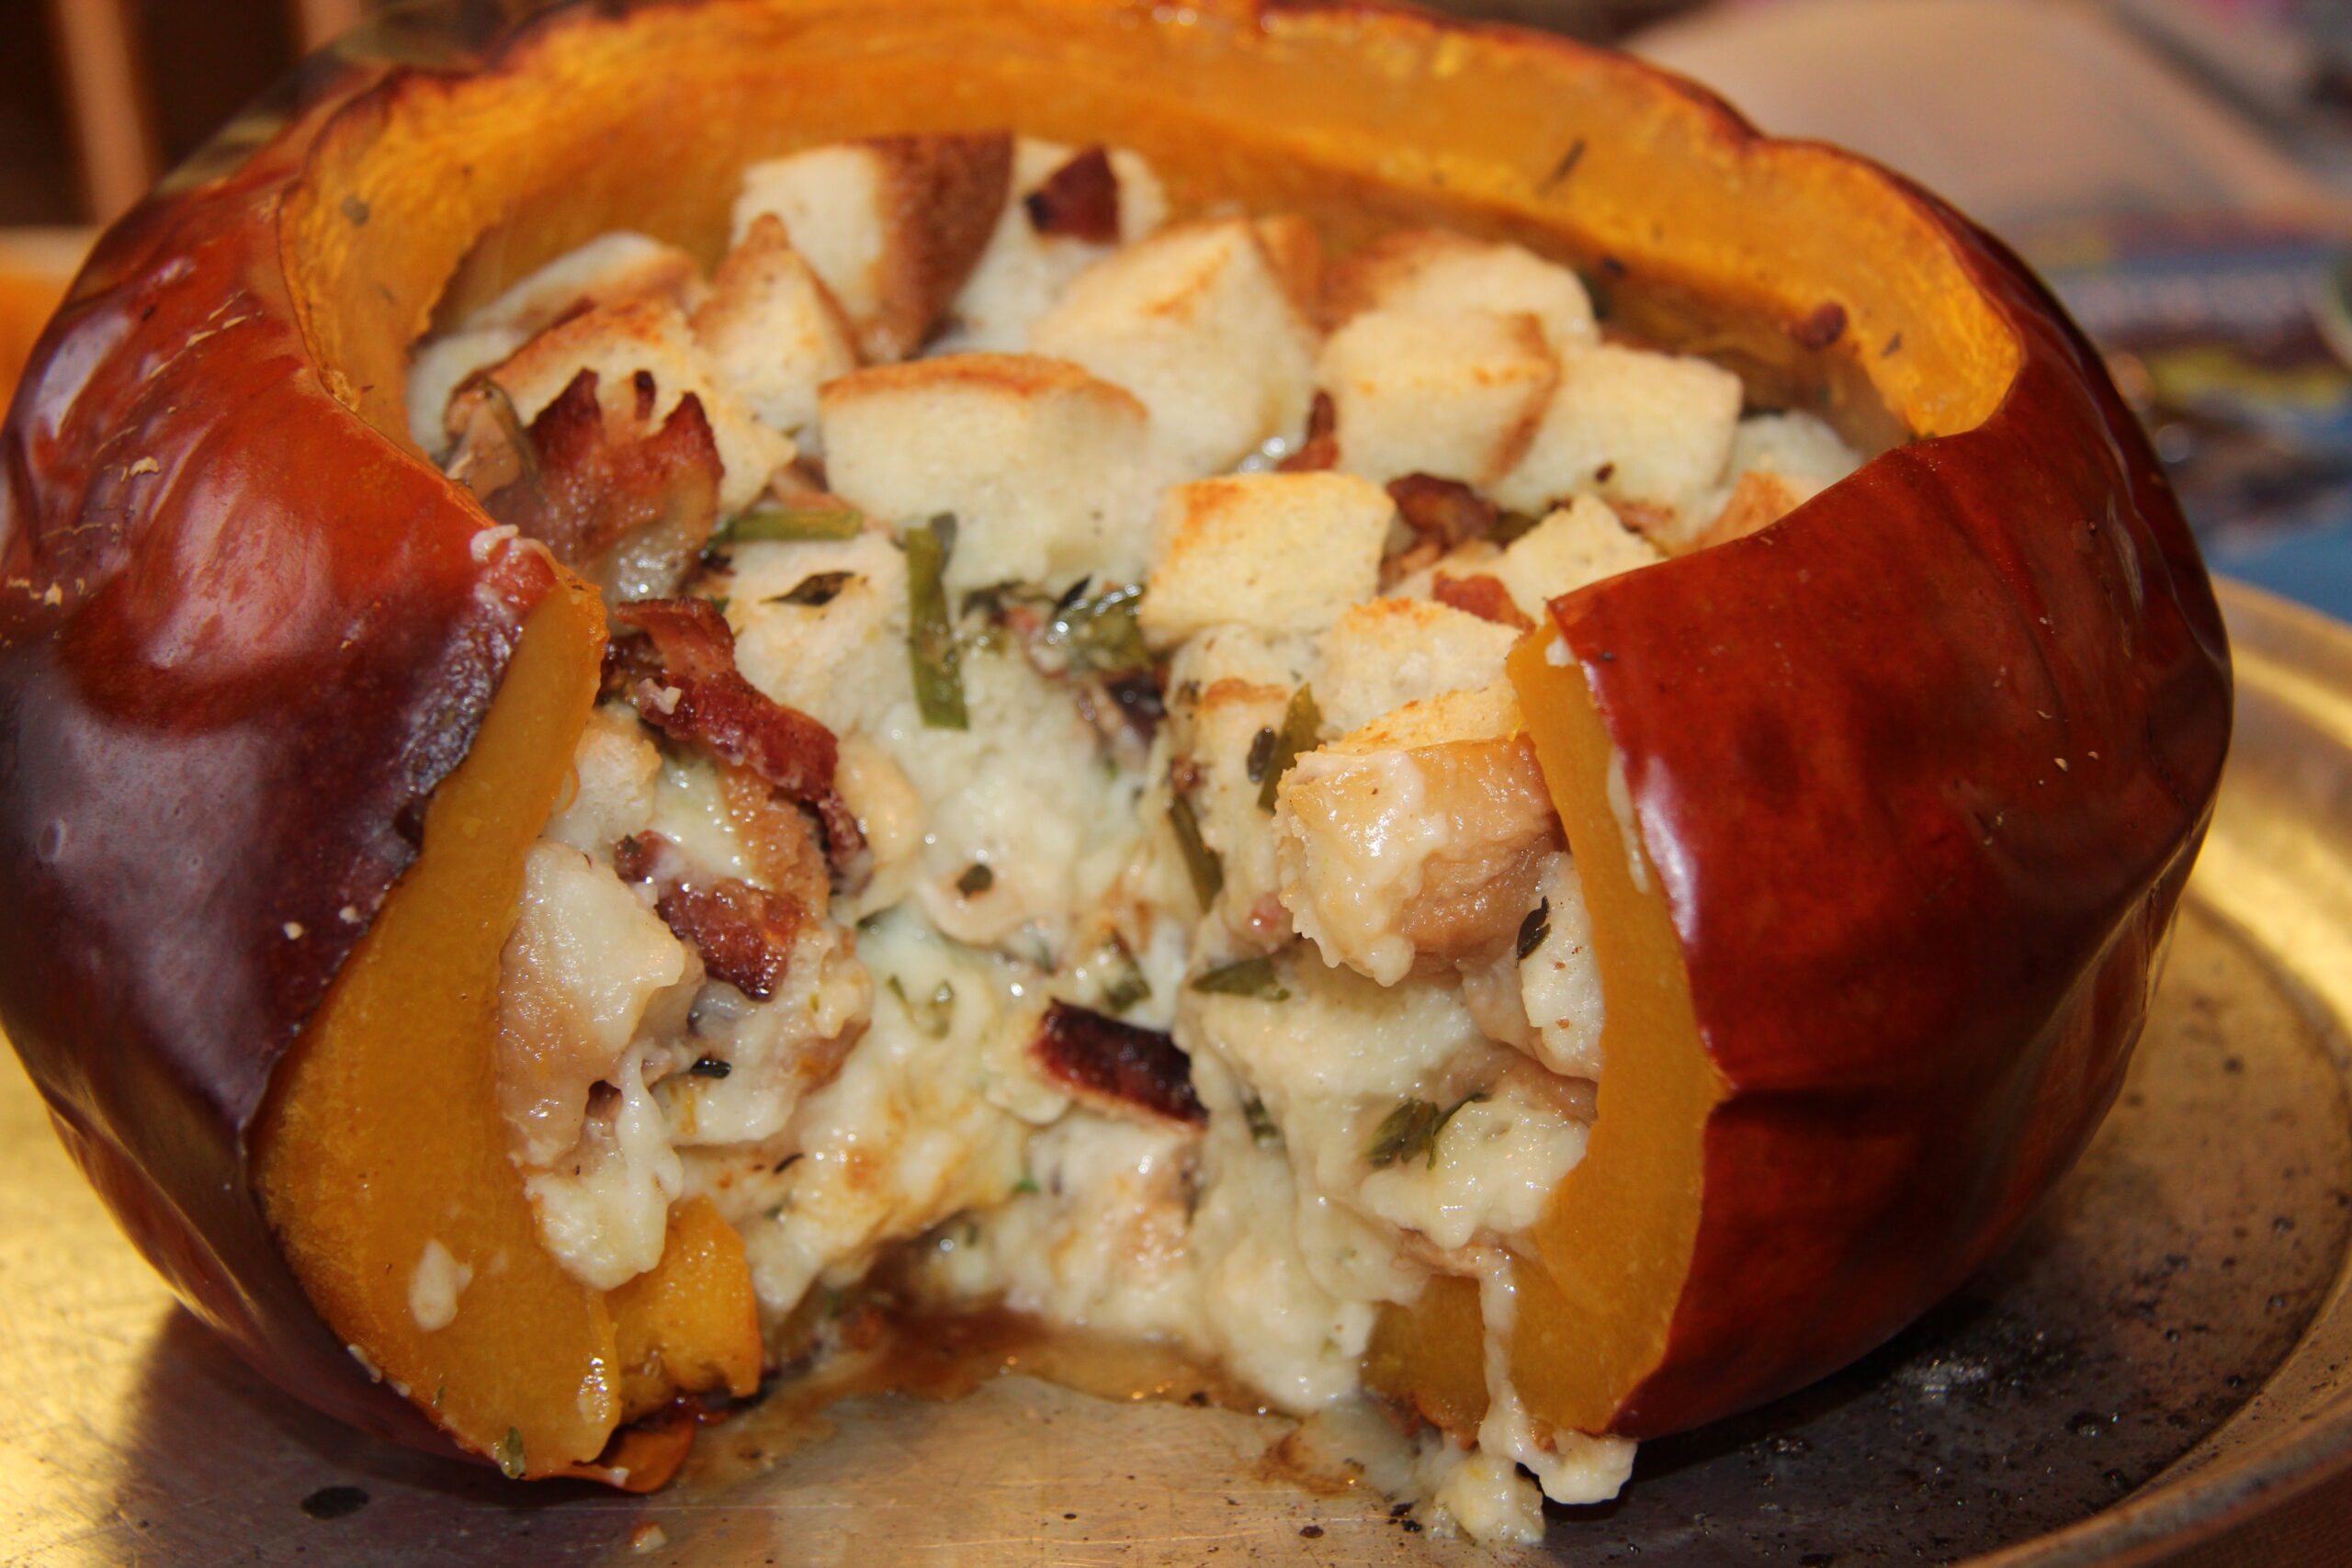 Featured image for “Pumpkin Stuffed with Everything Good”